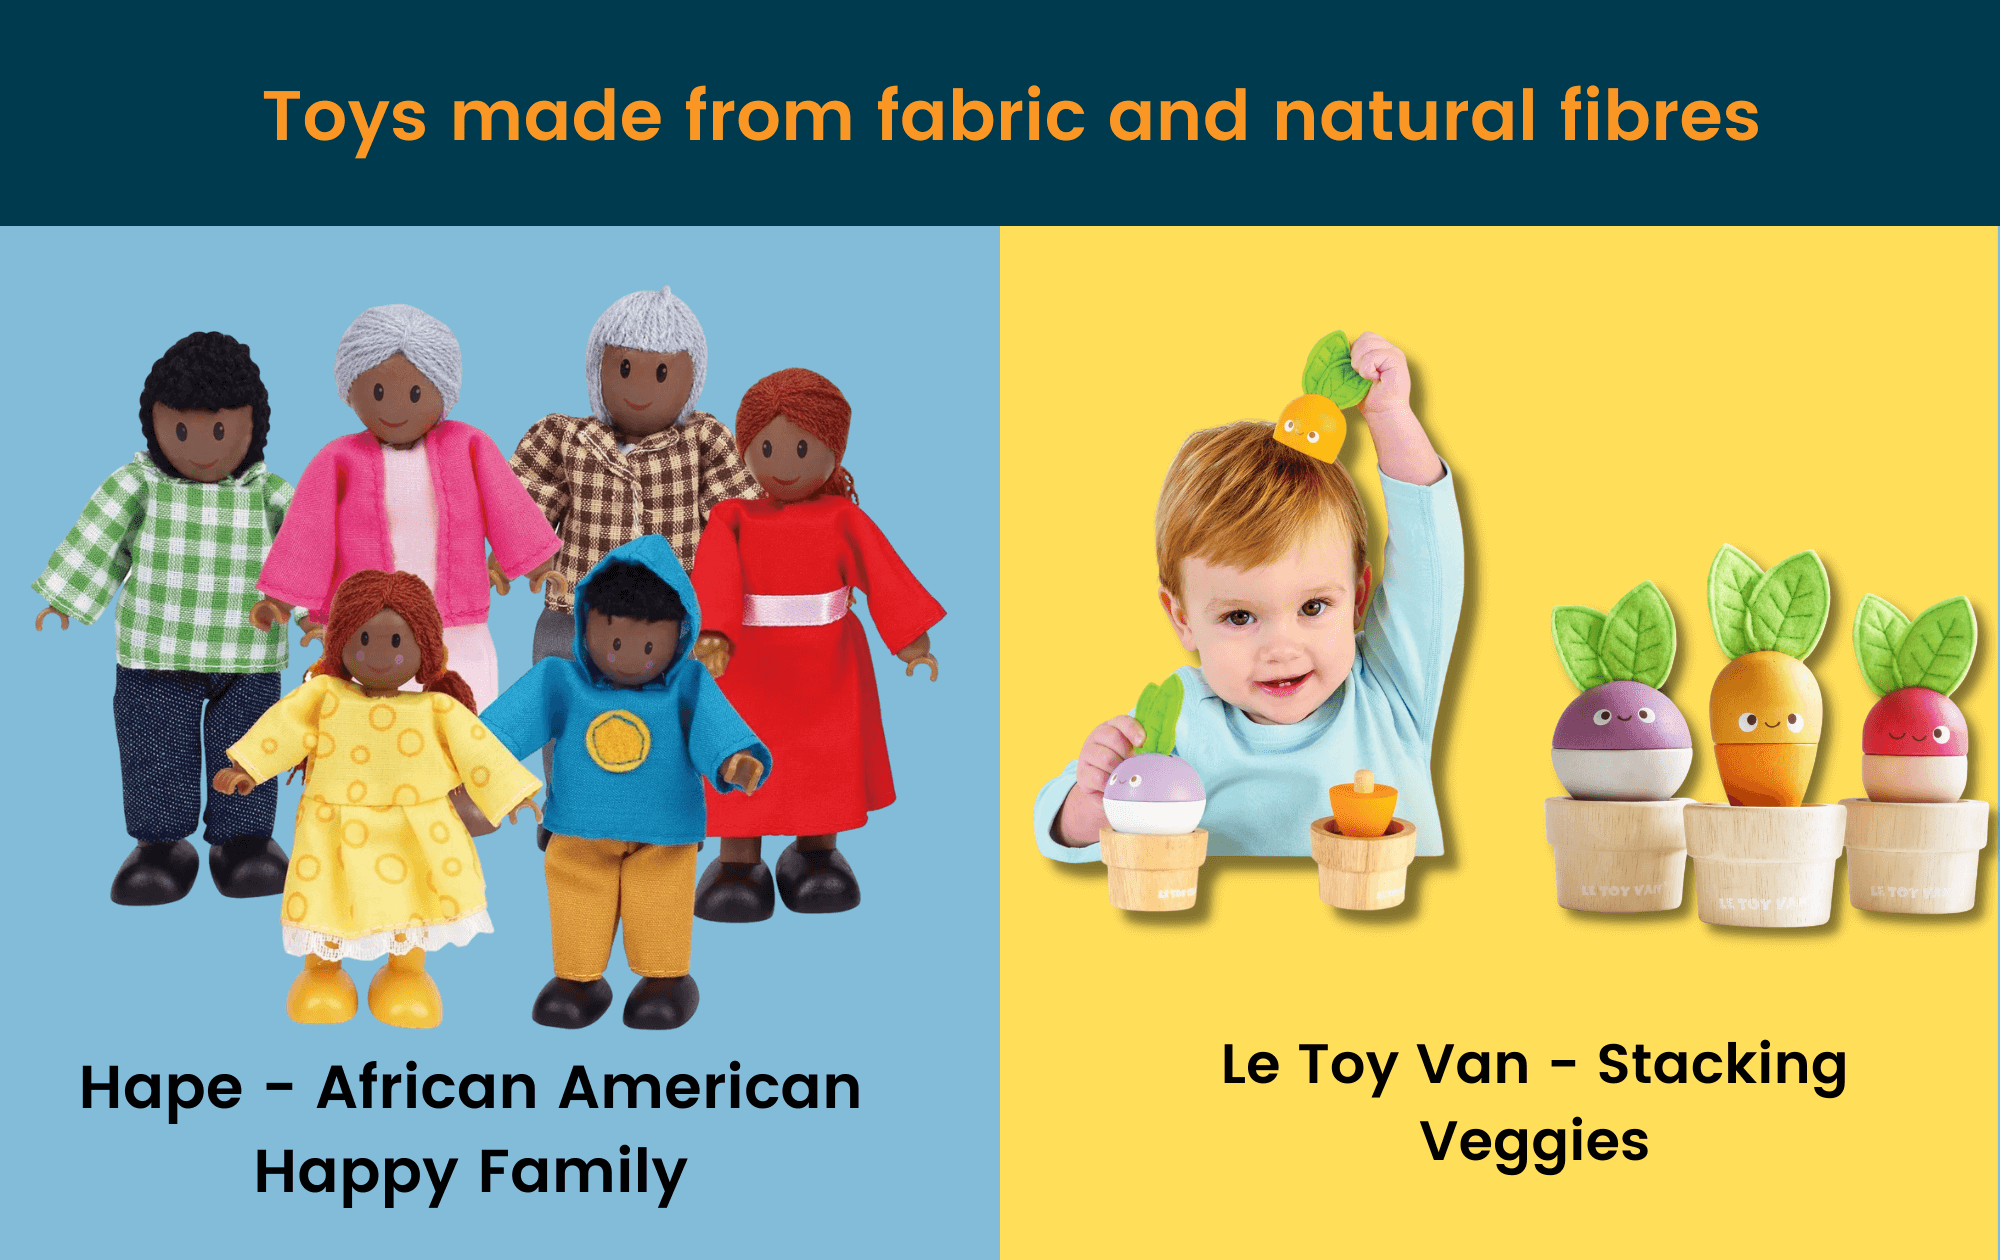 Toys made from fabric and natural fibres